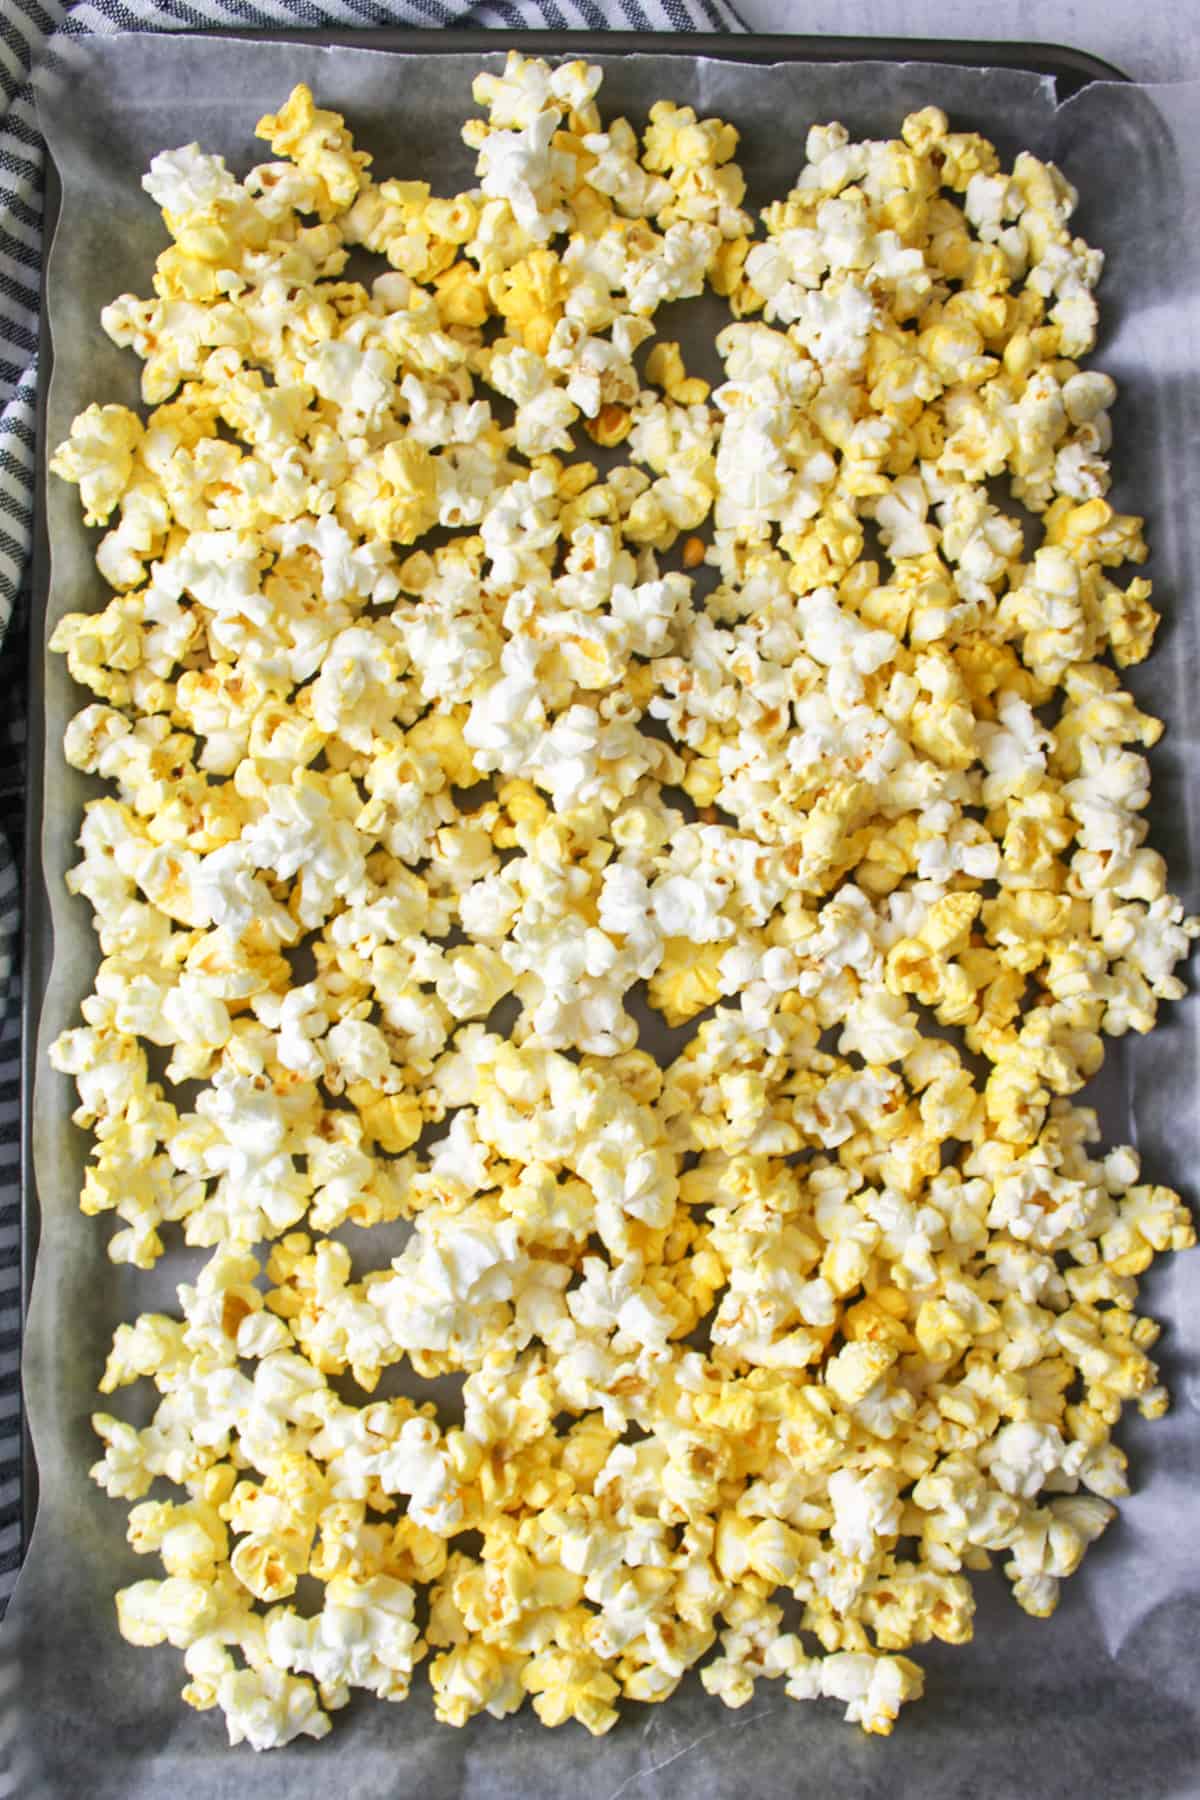 popcorn spread out on wax paper lined baking sheet